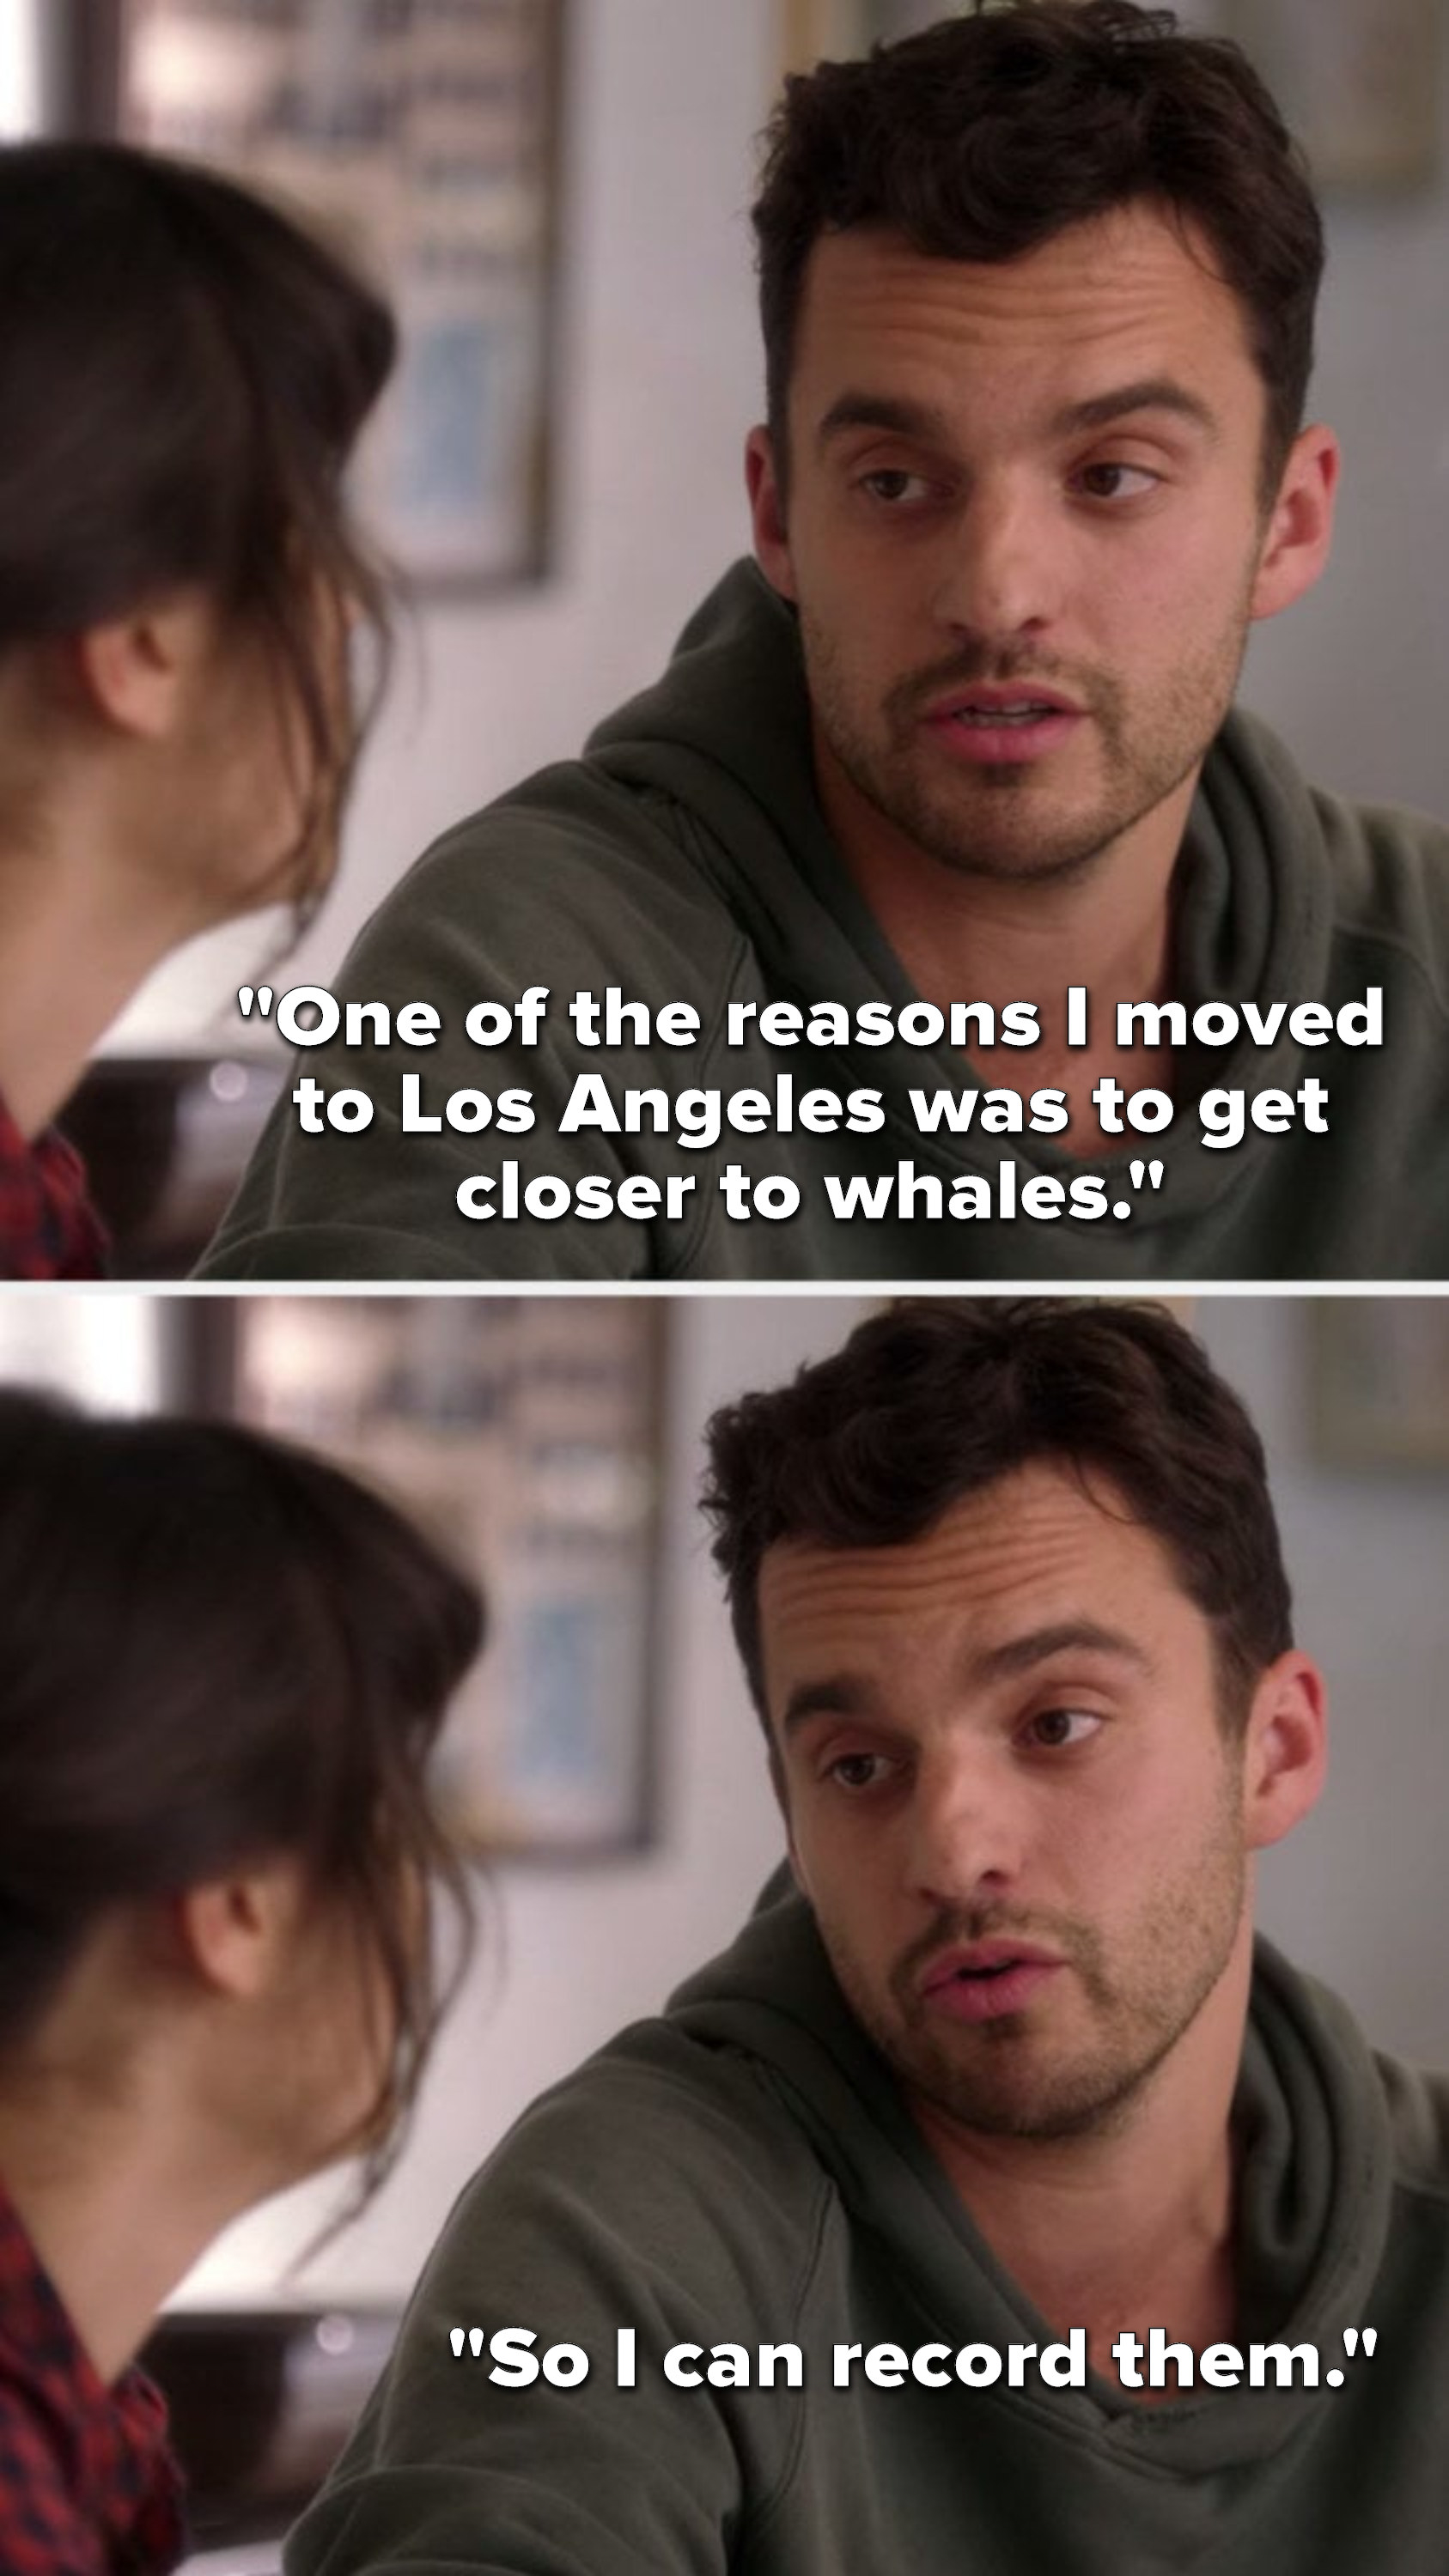 Nick says, &quot;One of the reasons I moved to Los Angeles was to get closer to whales, so I can record them&quot;